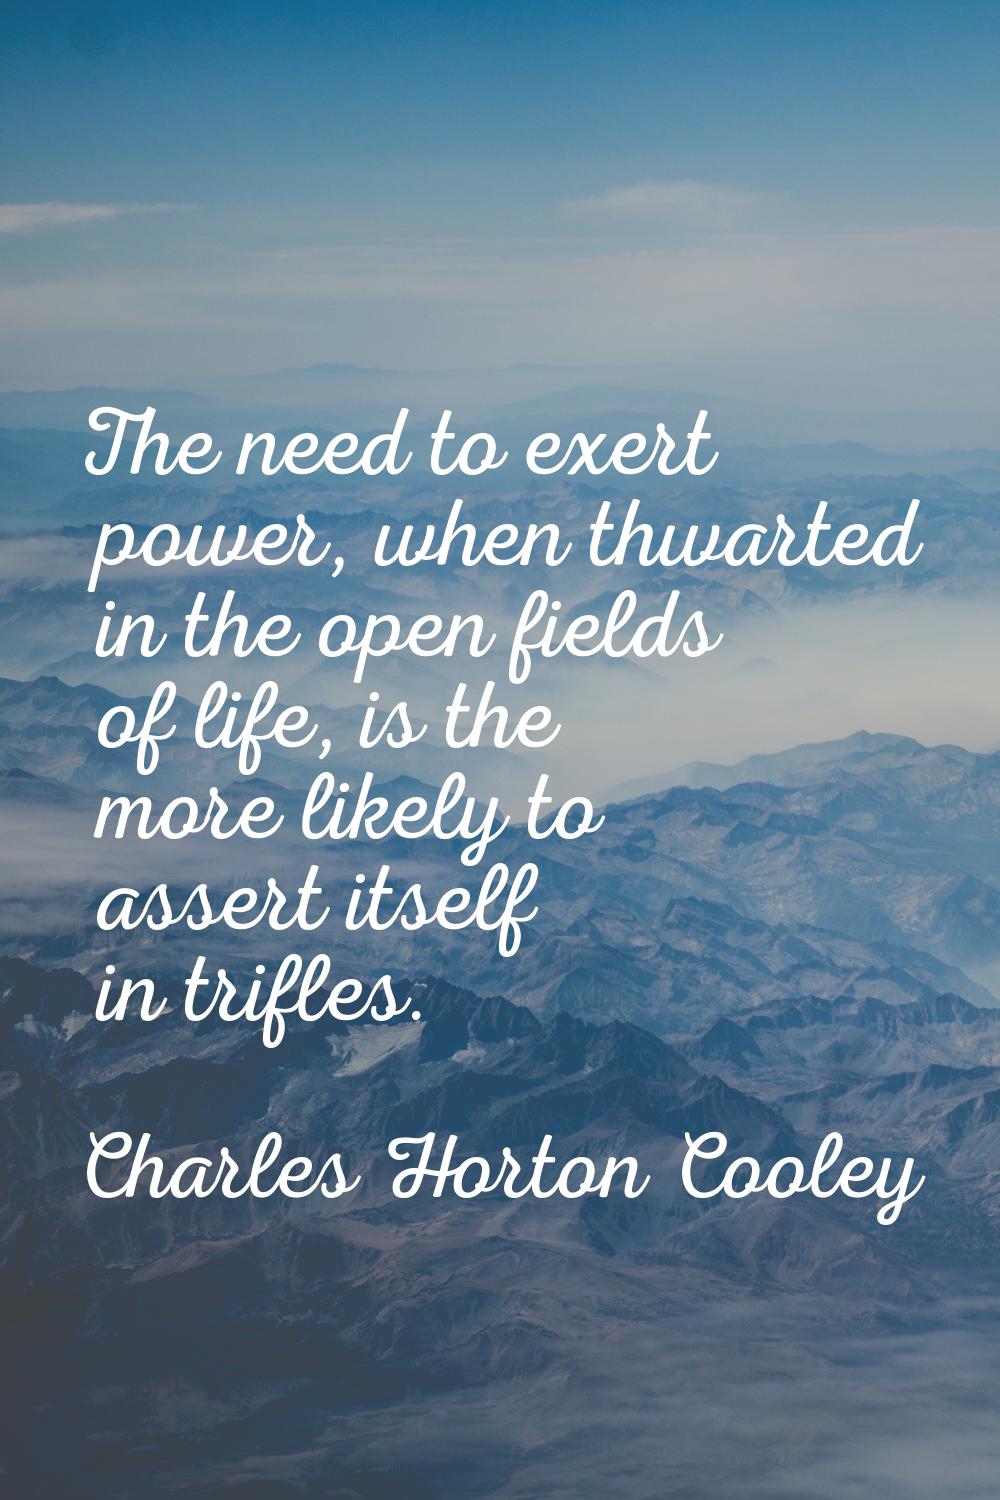 The need to exert power, when thwarted in the open fields of life, is the more likely to assert its